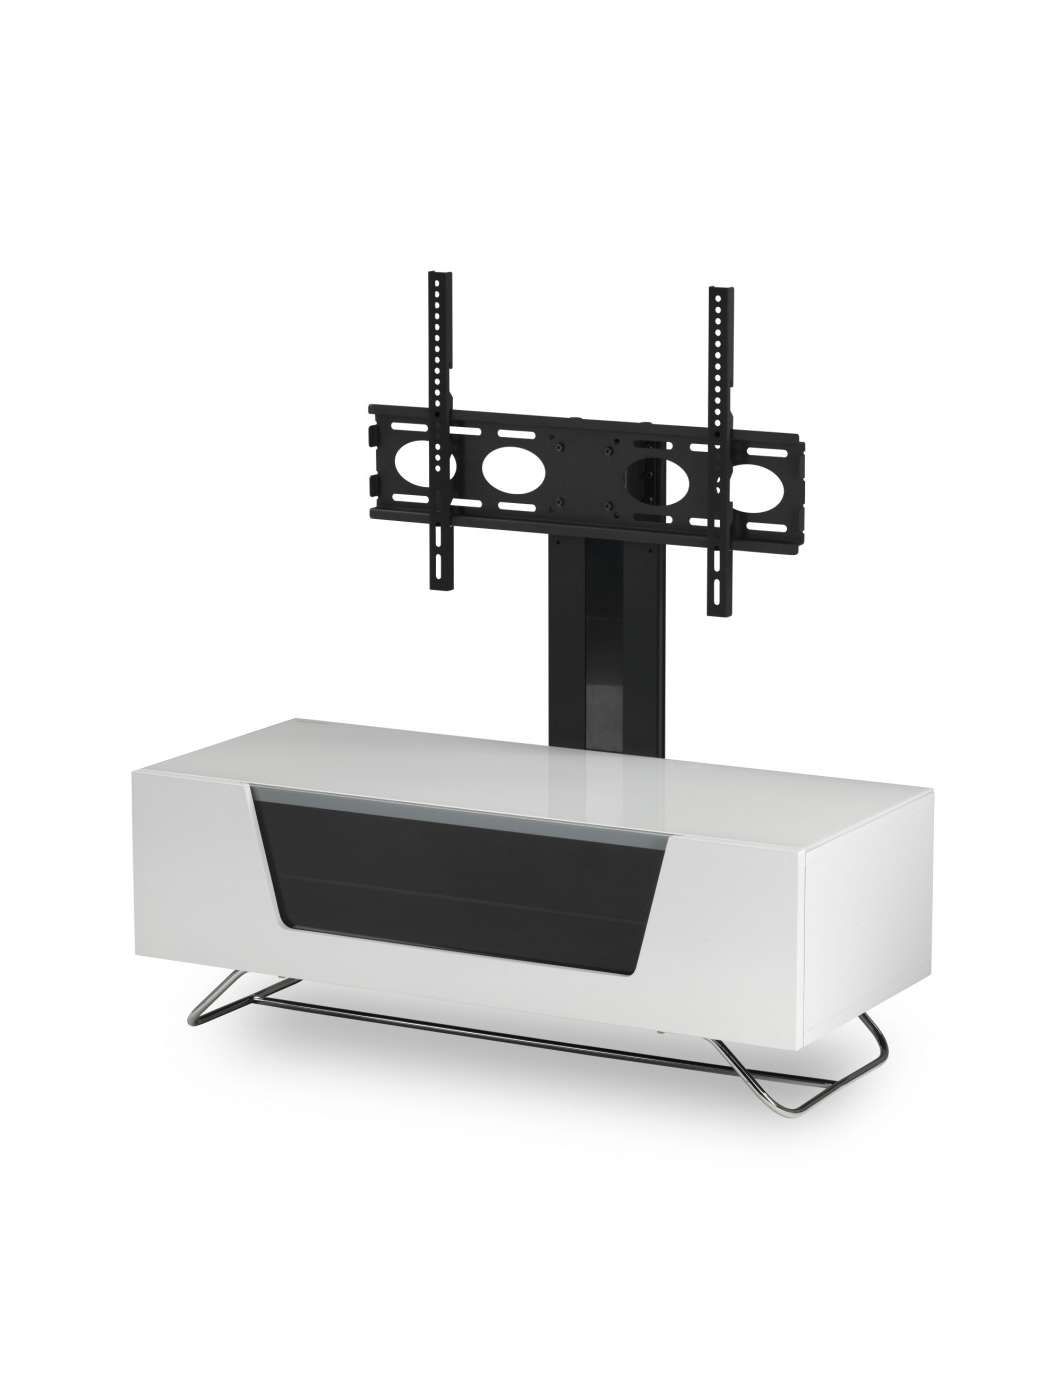 Alphason Chromium Cantilever Tv Stand Cro2 1000bkt Wh | 121 Tv Mounts Throughout White Cantilever Tv Stands (View 9 of 20)